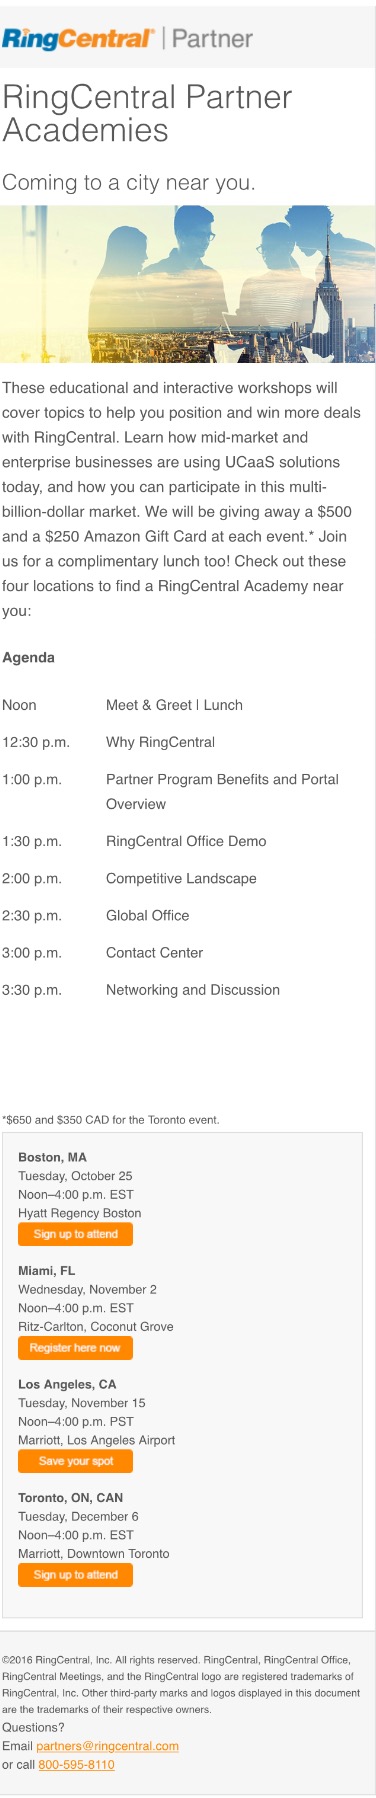 RINGCENTRAL_101416